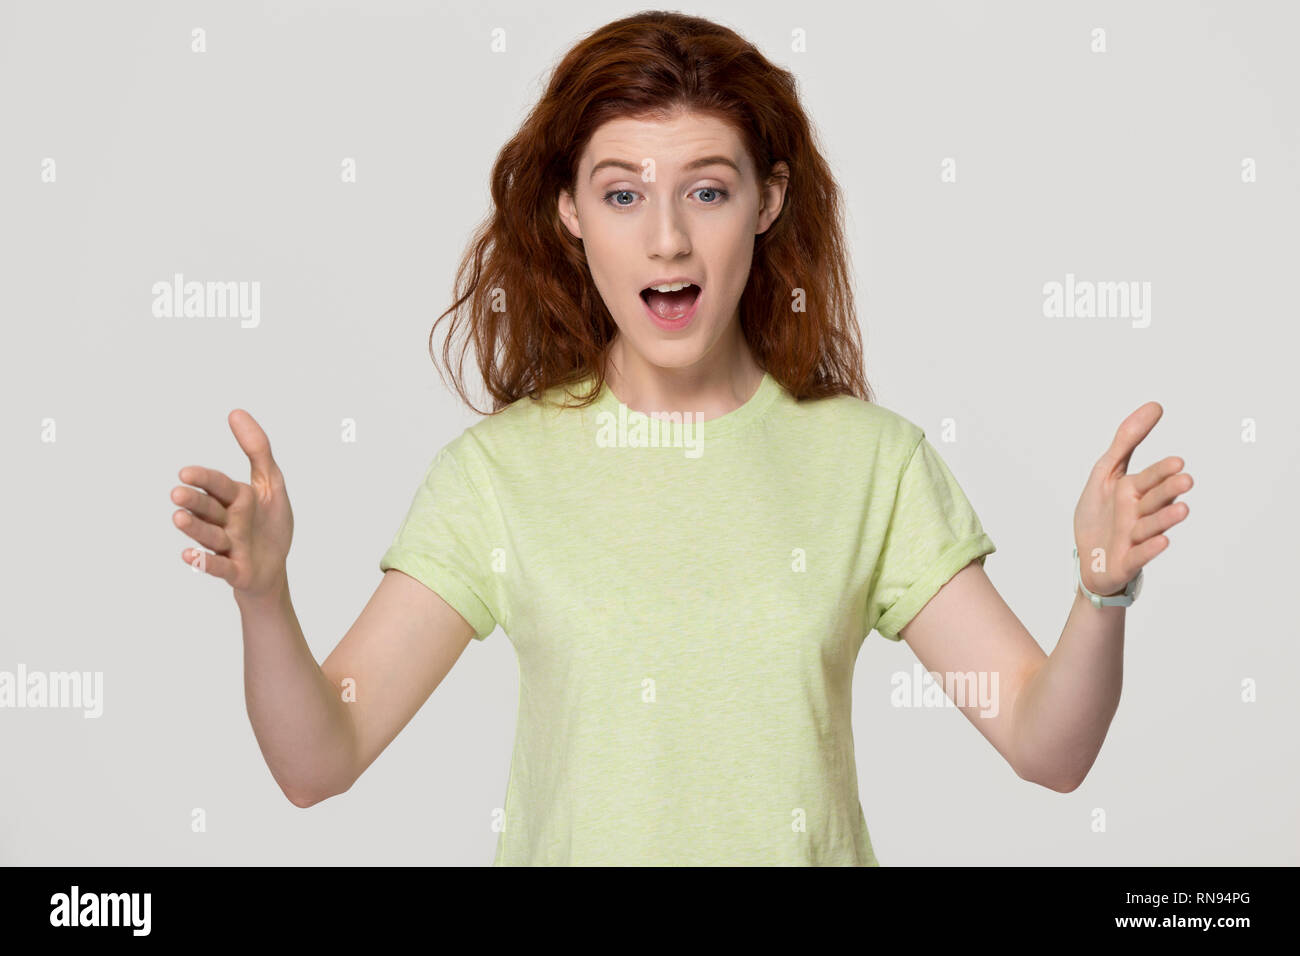 Shocked amazed redhead woman showing something big looking at hands Stock Photo